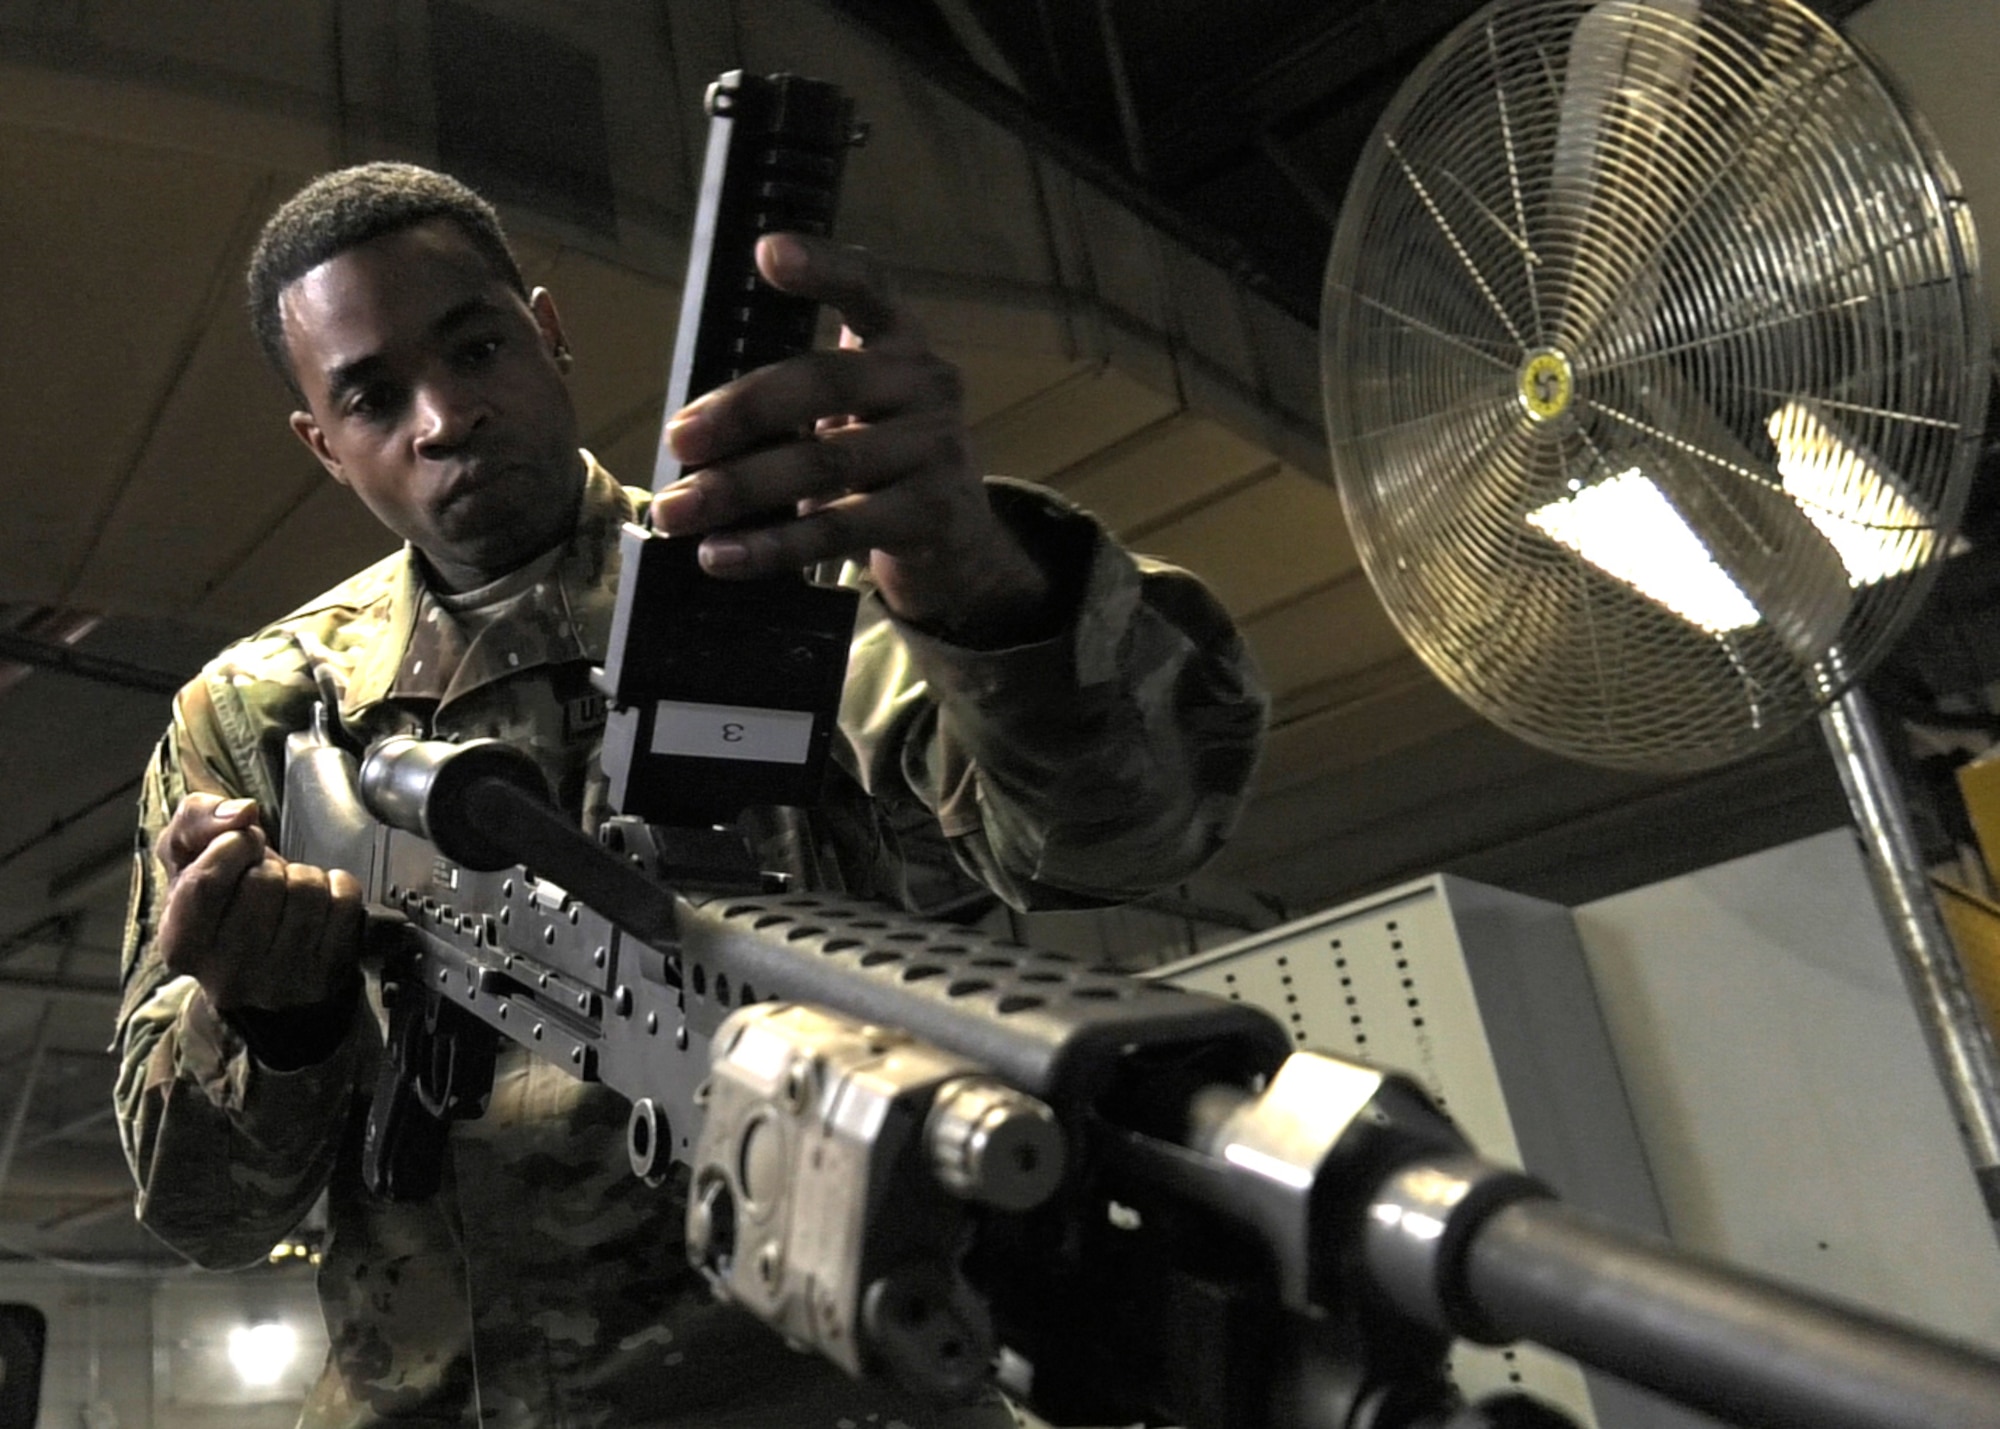 close of photo TSgt. Hamm inspecting weapon for mechanical discrepancies. there is a large circulating fan in the background to the right